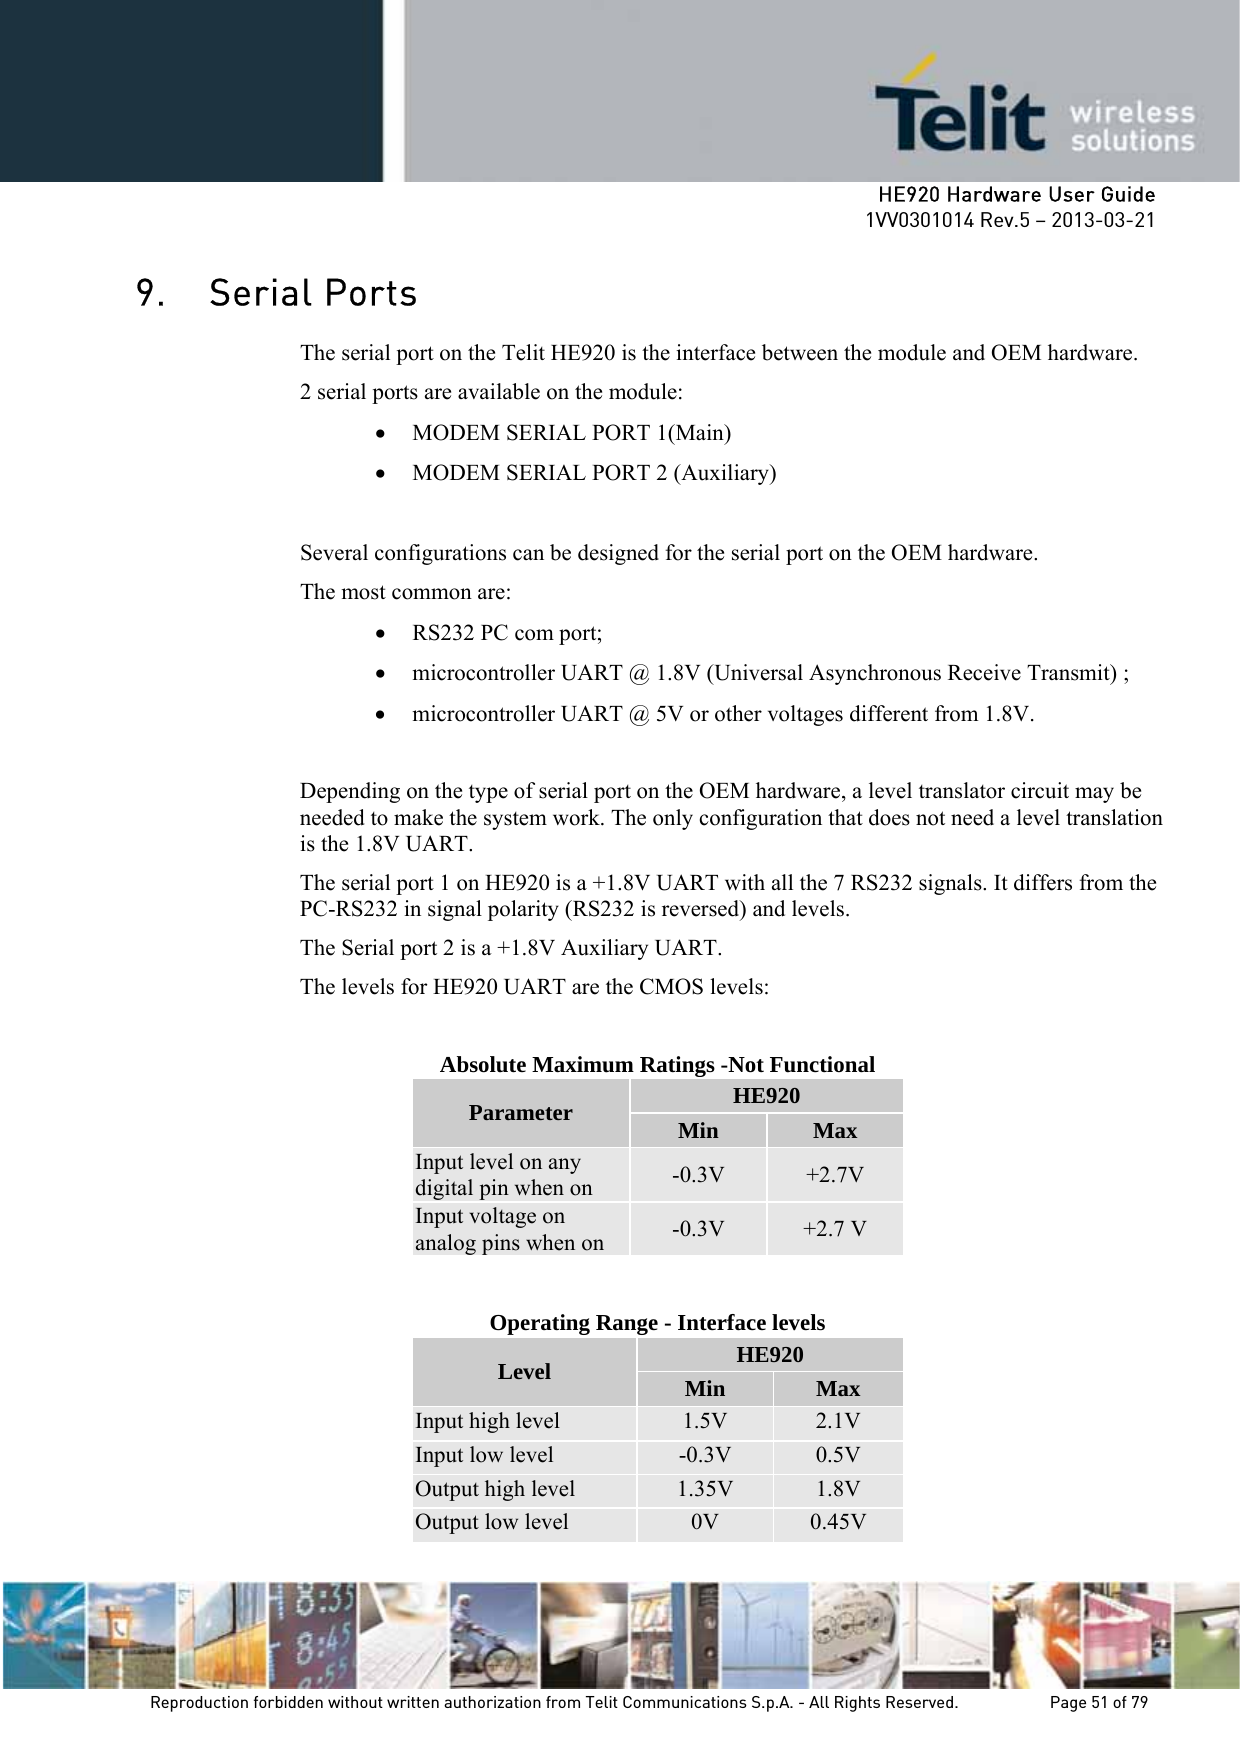     HE920 Hardware User Guide 1VV0301014 Rev.5 – 2013-03-21 Reproduction forbidden without written authorization from Telit Communications S.p.A. - All Rights Reserved.    Page 51 of 79  9. Serial Ports The serial port on the Telit HE920 is the interface between the module and OEM hardware.  2 serial ports are available on the module: • MODEM SERIAL PORT 1(Main) • MODEM SERIAL PORT 2 (Auxiliary)  Several configurations can be designed for the serial port on the OEM hardware.  The most common are: • RS232 PC com port; • microcontroller UART @ 1.8V (Universal Asynchronous Receive Transmit) ; • microcontroller UART @ 5V or other voltages different from 1.8V.  Depending on the type of serial port on the OEM hardware, a level translator circuit may be needed to make the system work. The only configuration that does not need a level translation is the 1.8V UART. The serial port 1 on HE920 is a +1.8V UART with all the 7 RS232 signals. It differs from the PC-RS232 in signal polarity (RS232 is reversed) and levels. The Serial port 2 is a +1.8V Auxiliary UART. The levels for HE920 UART are the CMOS levels:  Absolute Maximum Ratings -Not Functional Parameter  HE920 Min  Max Input level on any digital pin when on  -0.3V  +2.7V Input voltage on analog pins when on  -0.3V  +2.7 V   Operating Range - Interface levels Level  HE920 Min  Max Input high level  1.5V  2.1V Input low level  -0.3V  0.5V Output high level  1.35V  1.8V Output low level  0V  0.45V  